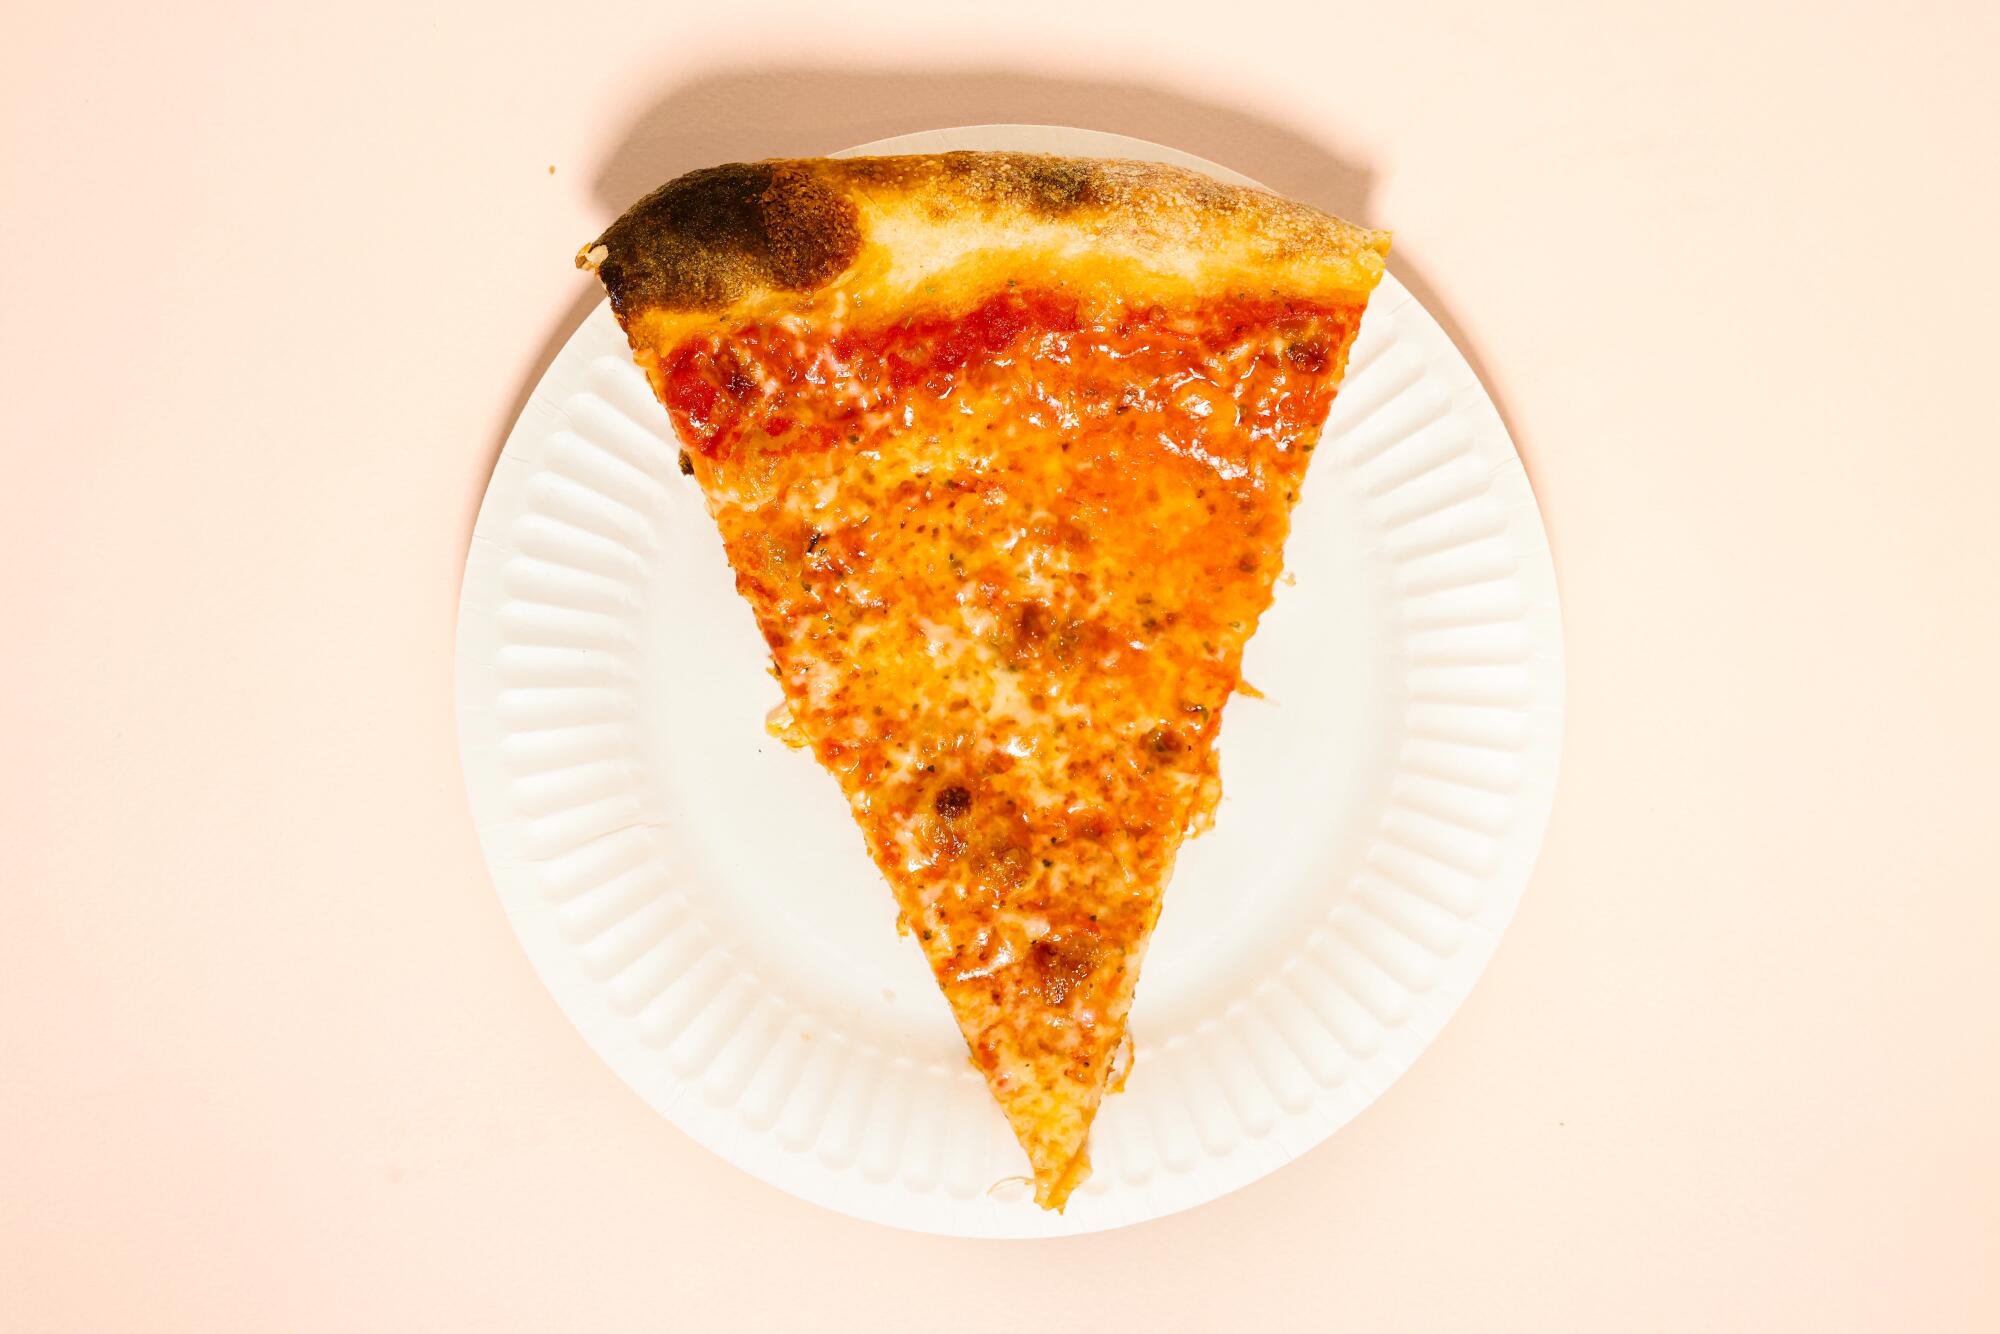 A slice of cheese pizza on a paper plate against a pink background.